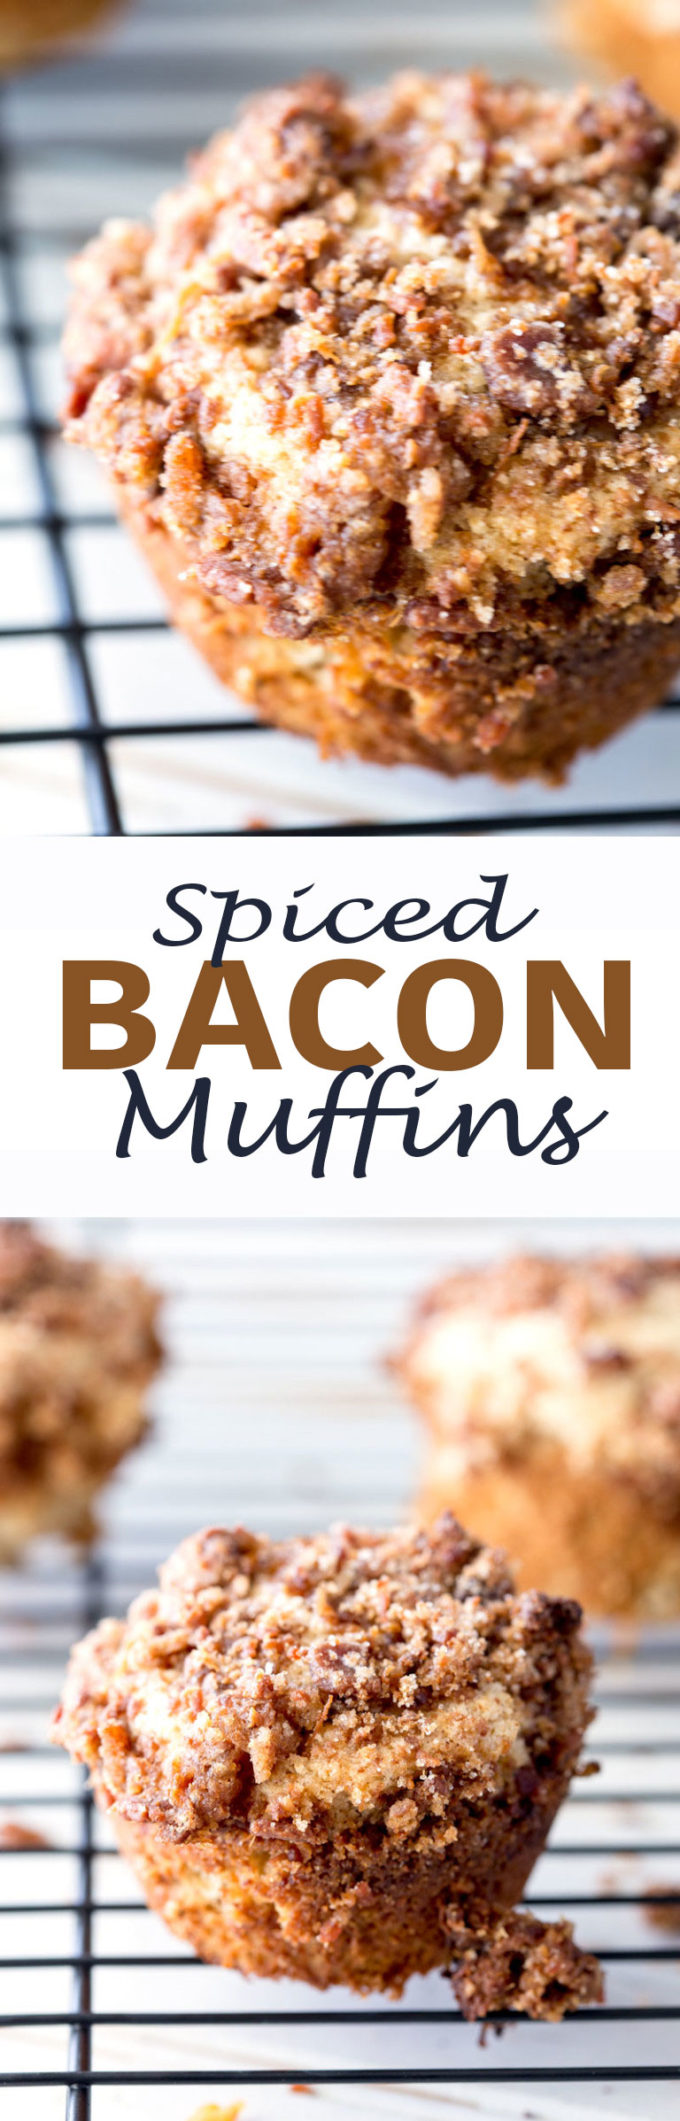 Spiced Bacon Muffins